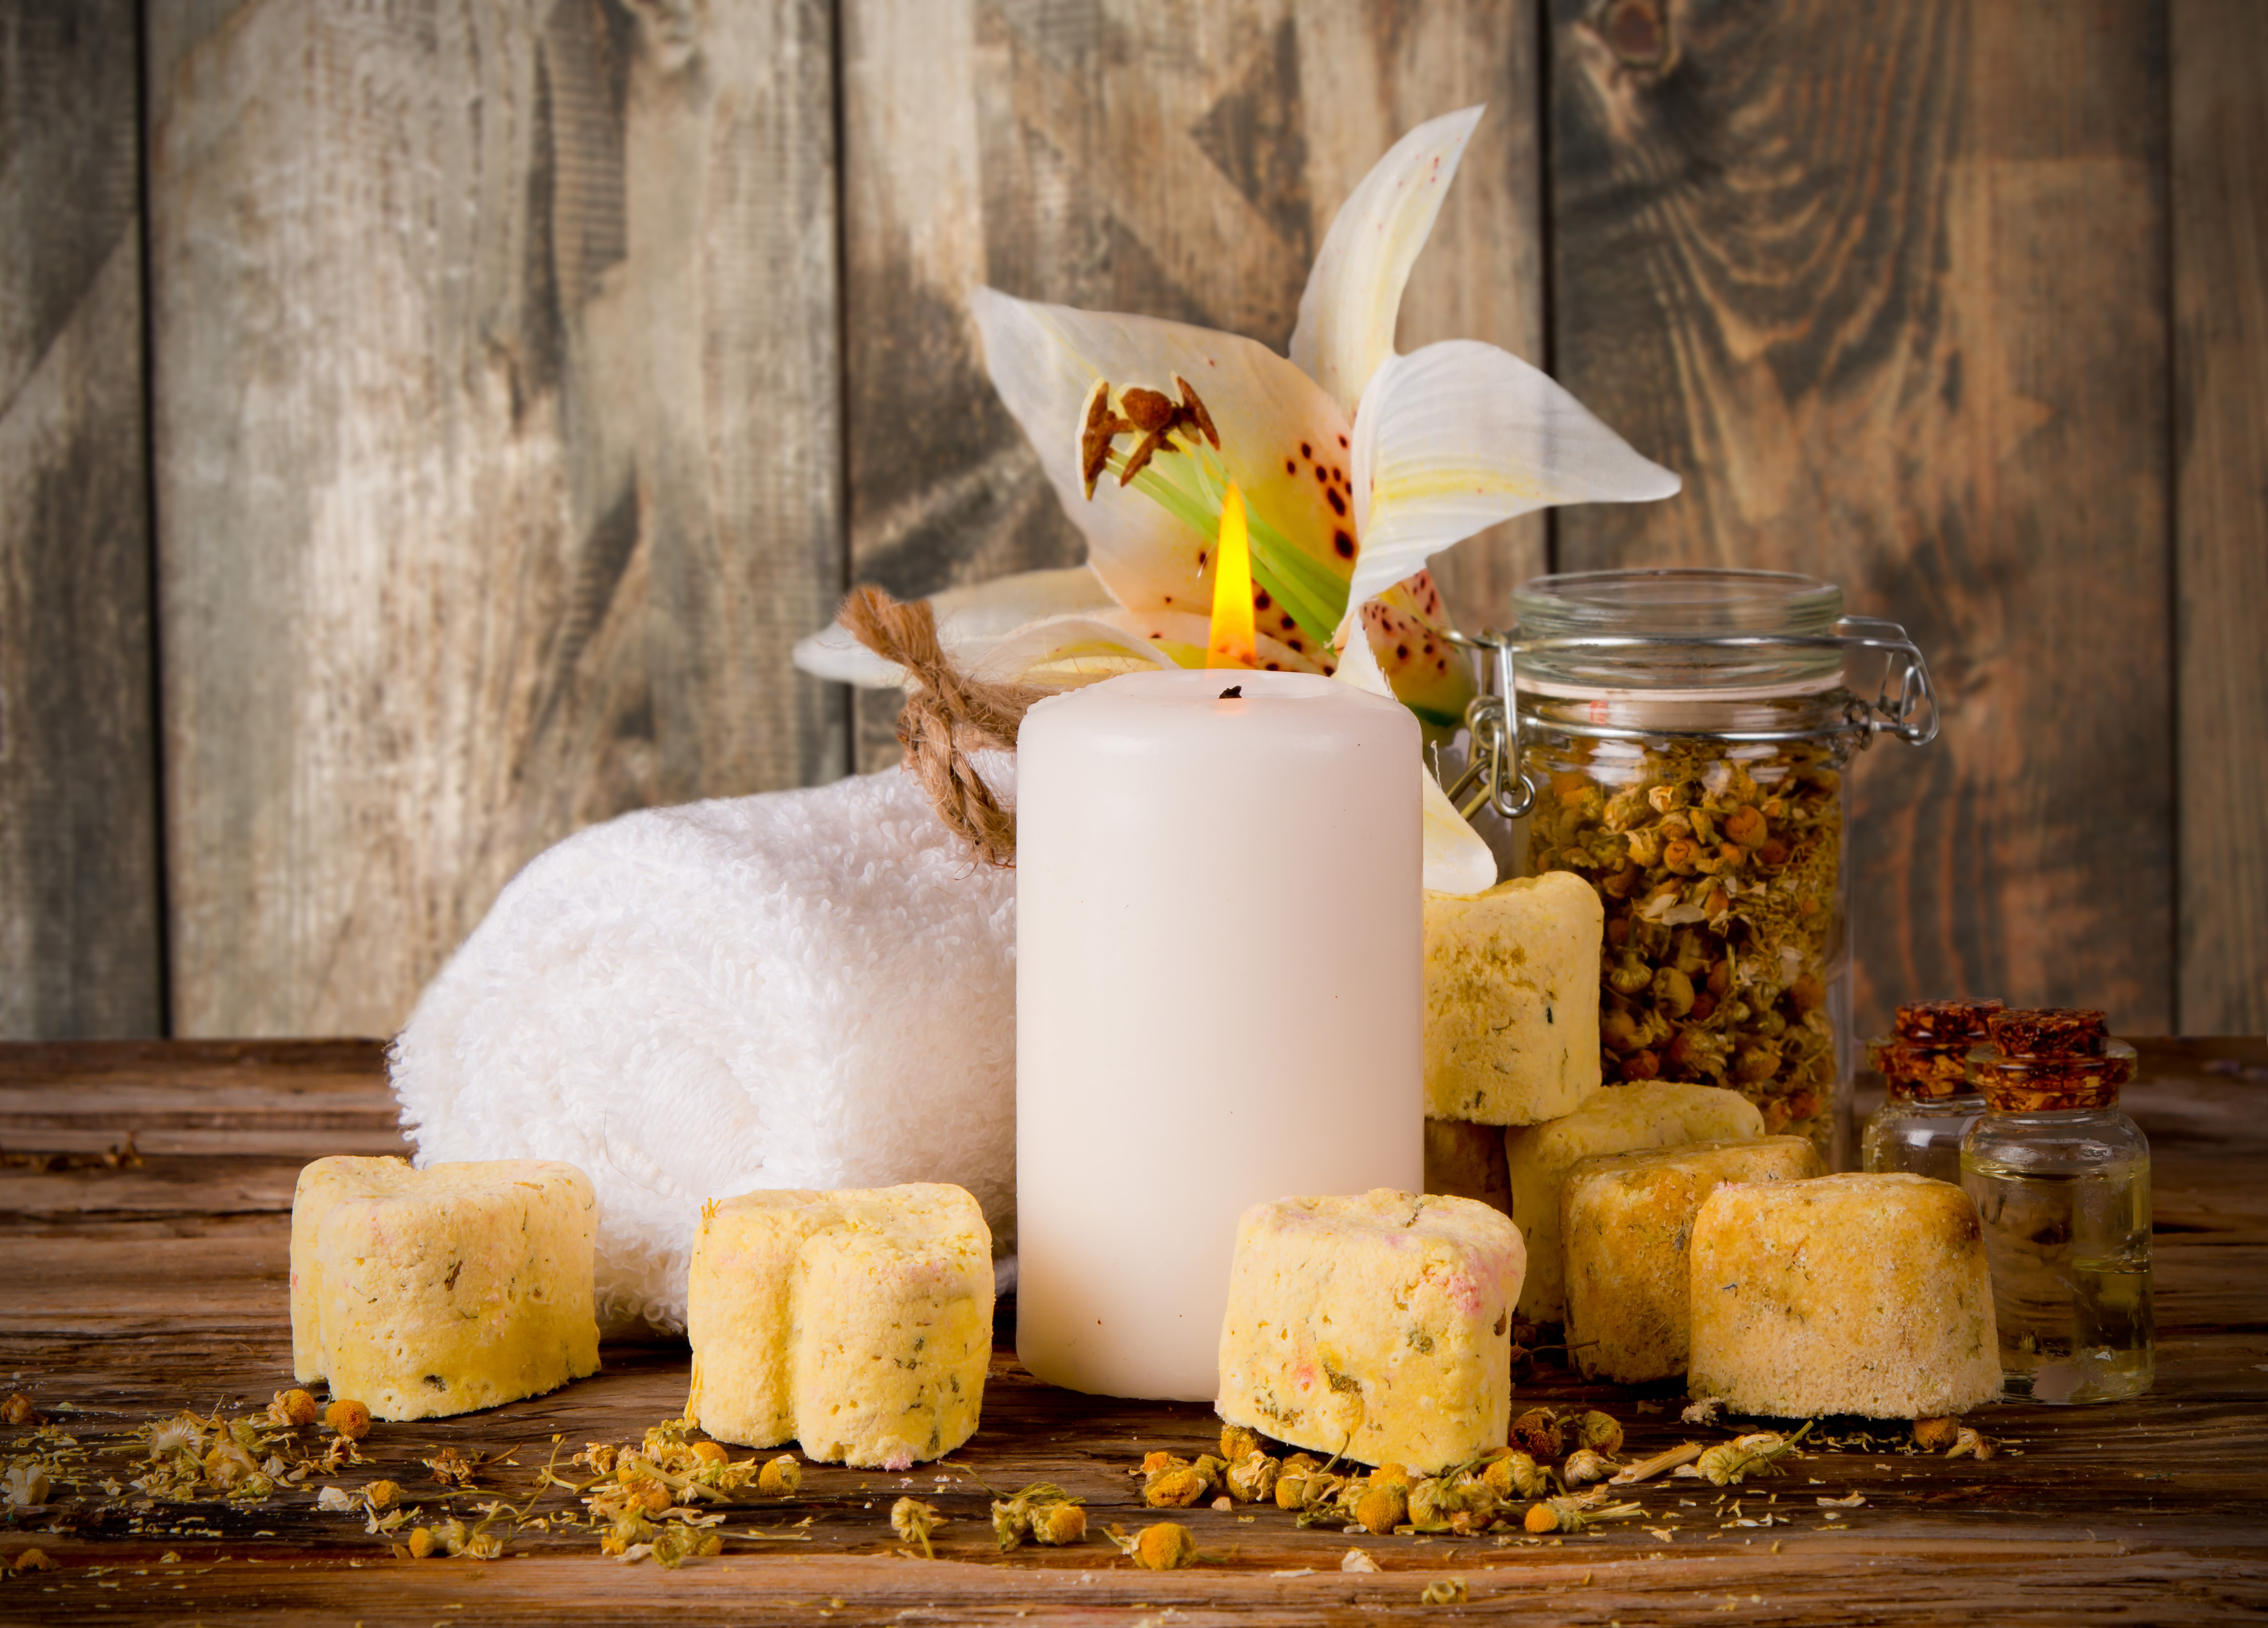 Spa Flower Soap Towel Candle Still Life 6000x4308